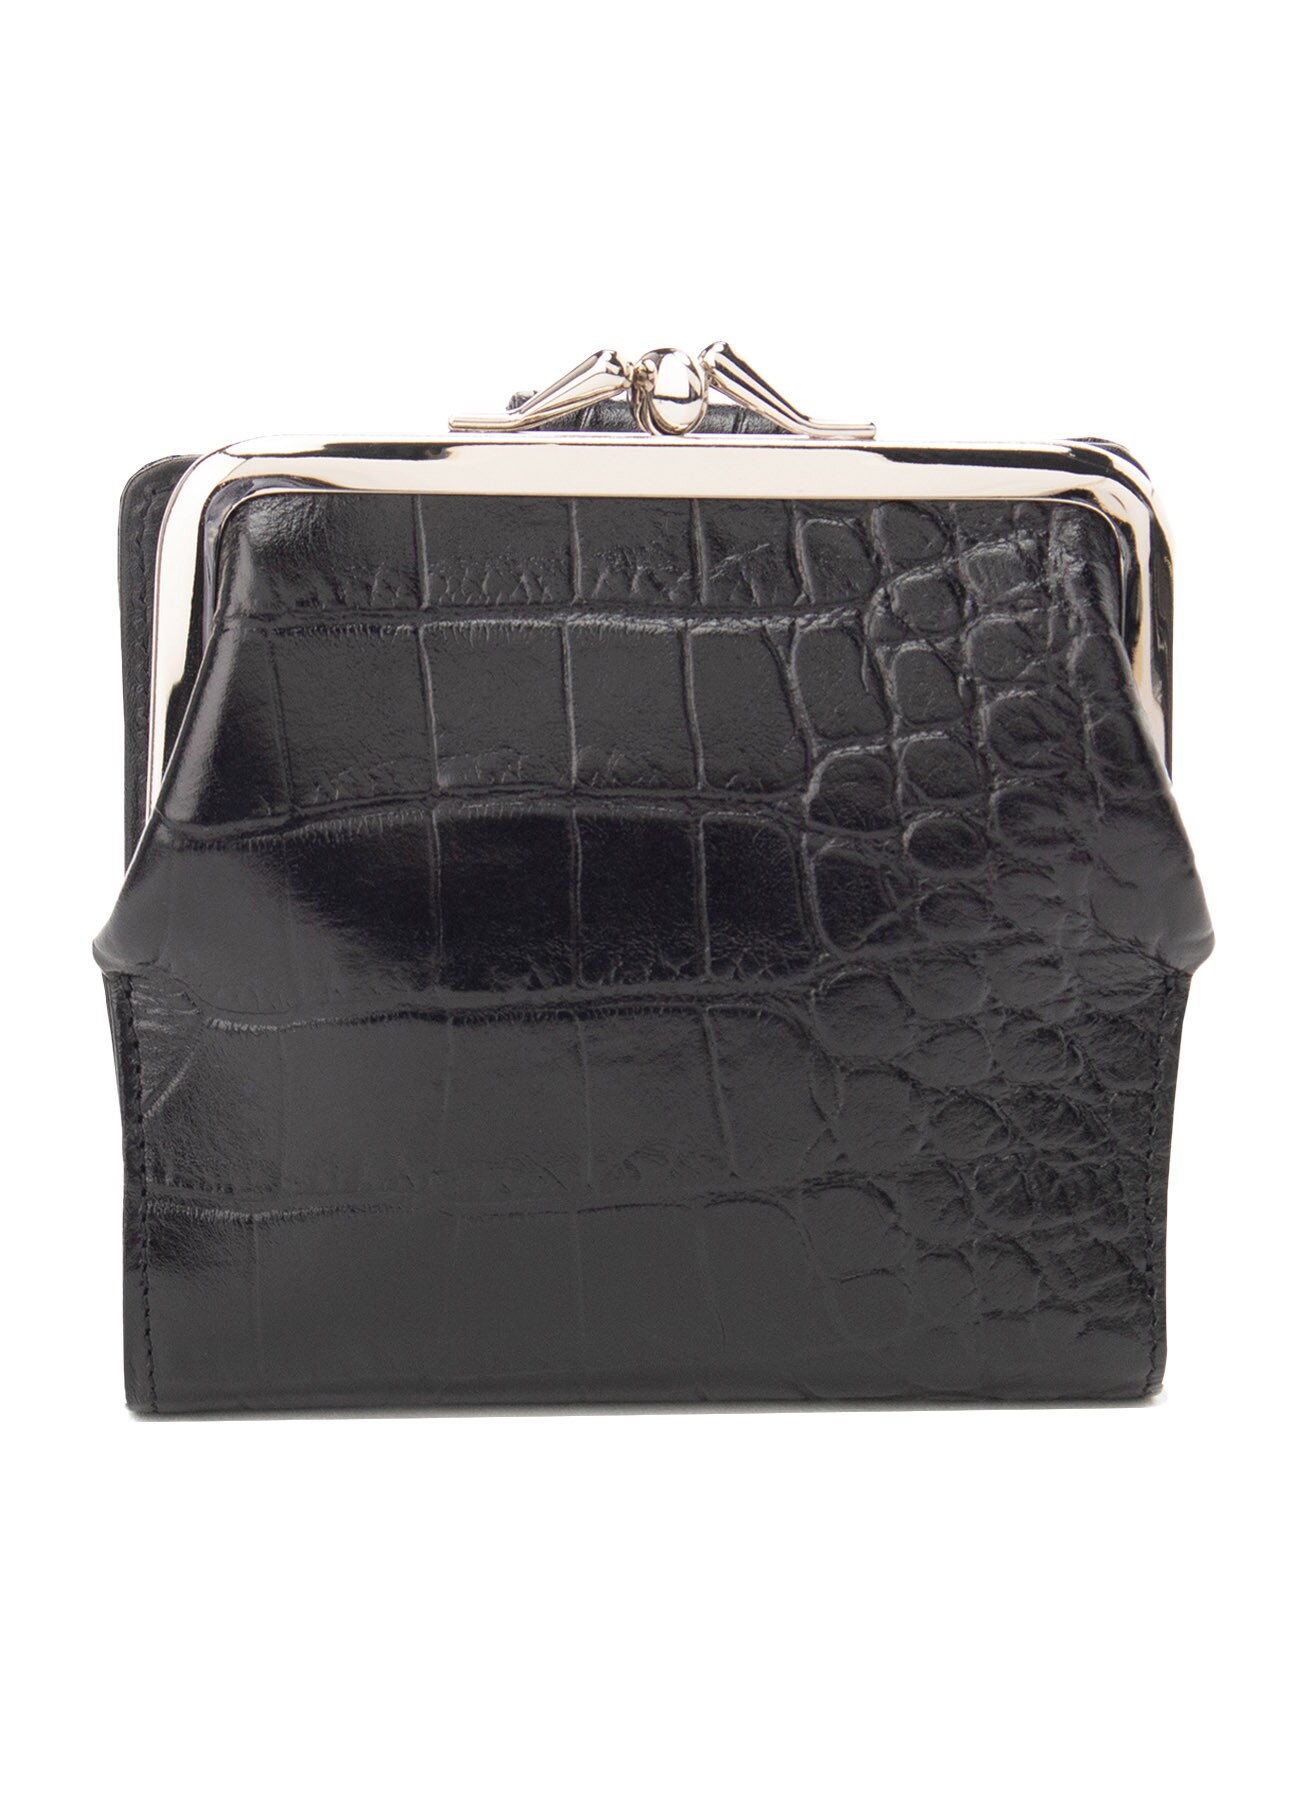 EMBOSSED CROCODILE LEATHER SMALL CLASP WALLET